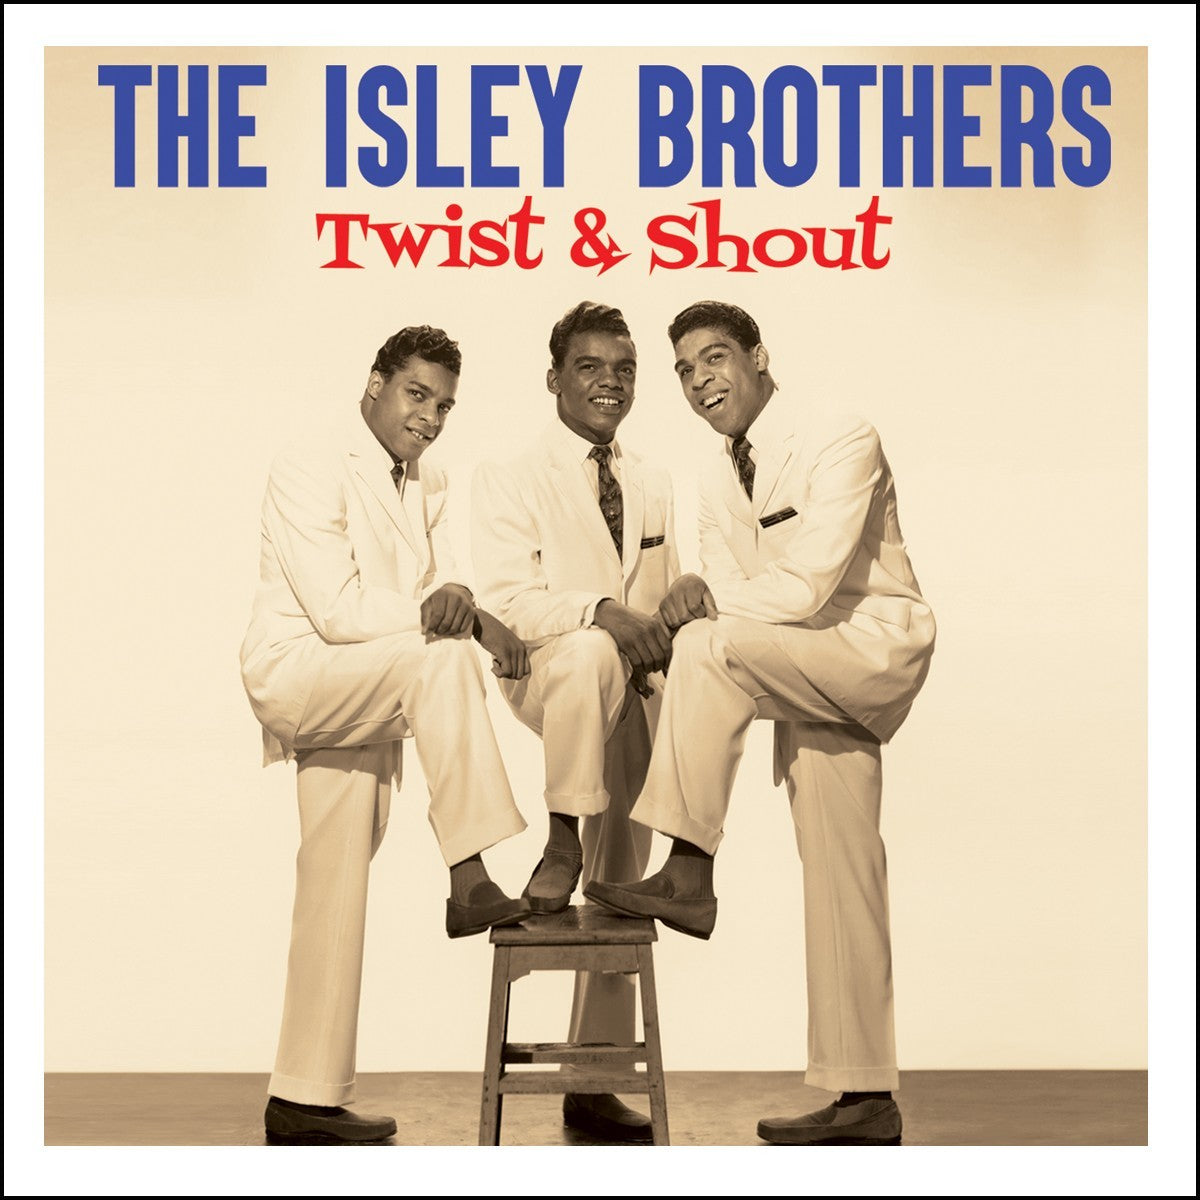 The Isley Brothers ‎Twist & Shout 2 x CD SET (NOT NOW)